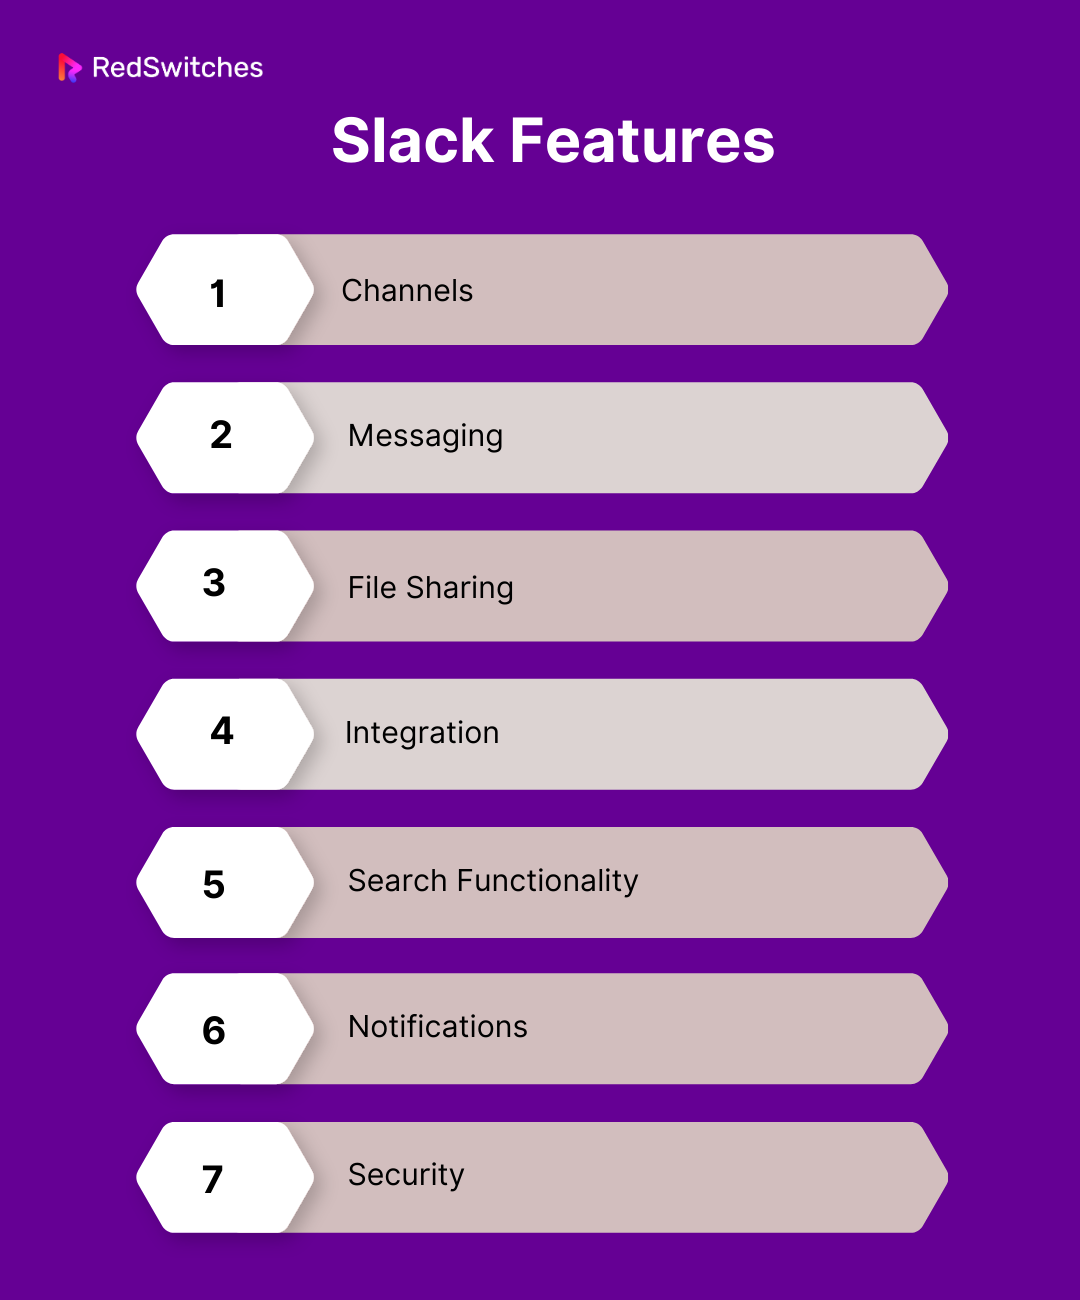 Features of Slack